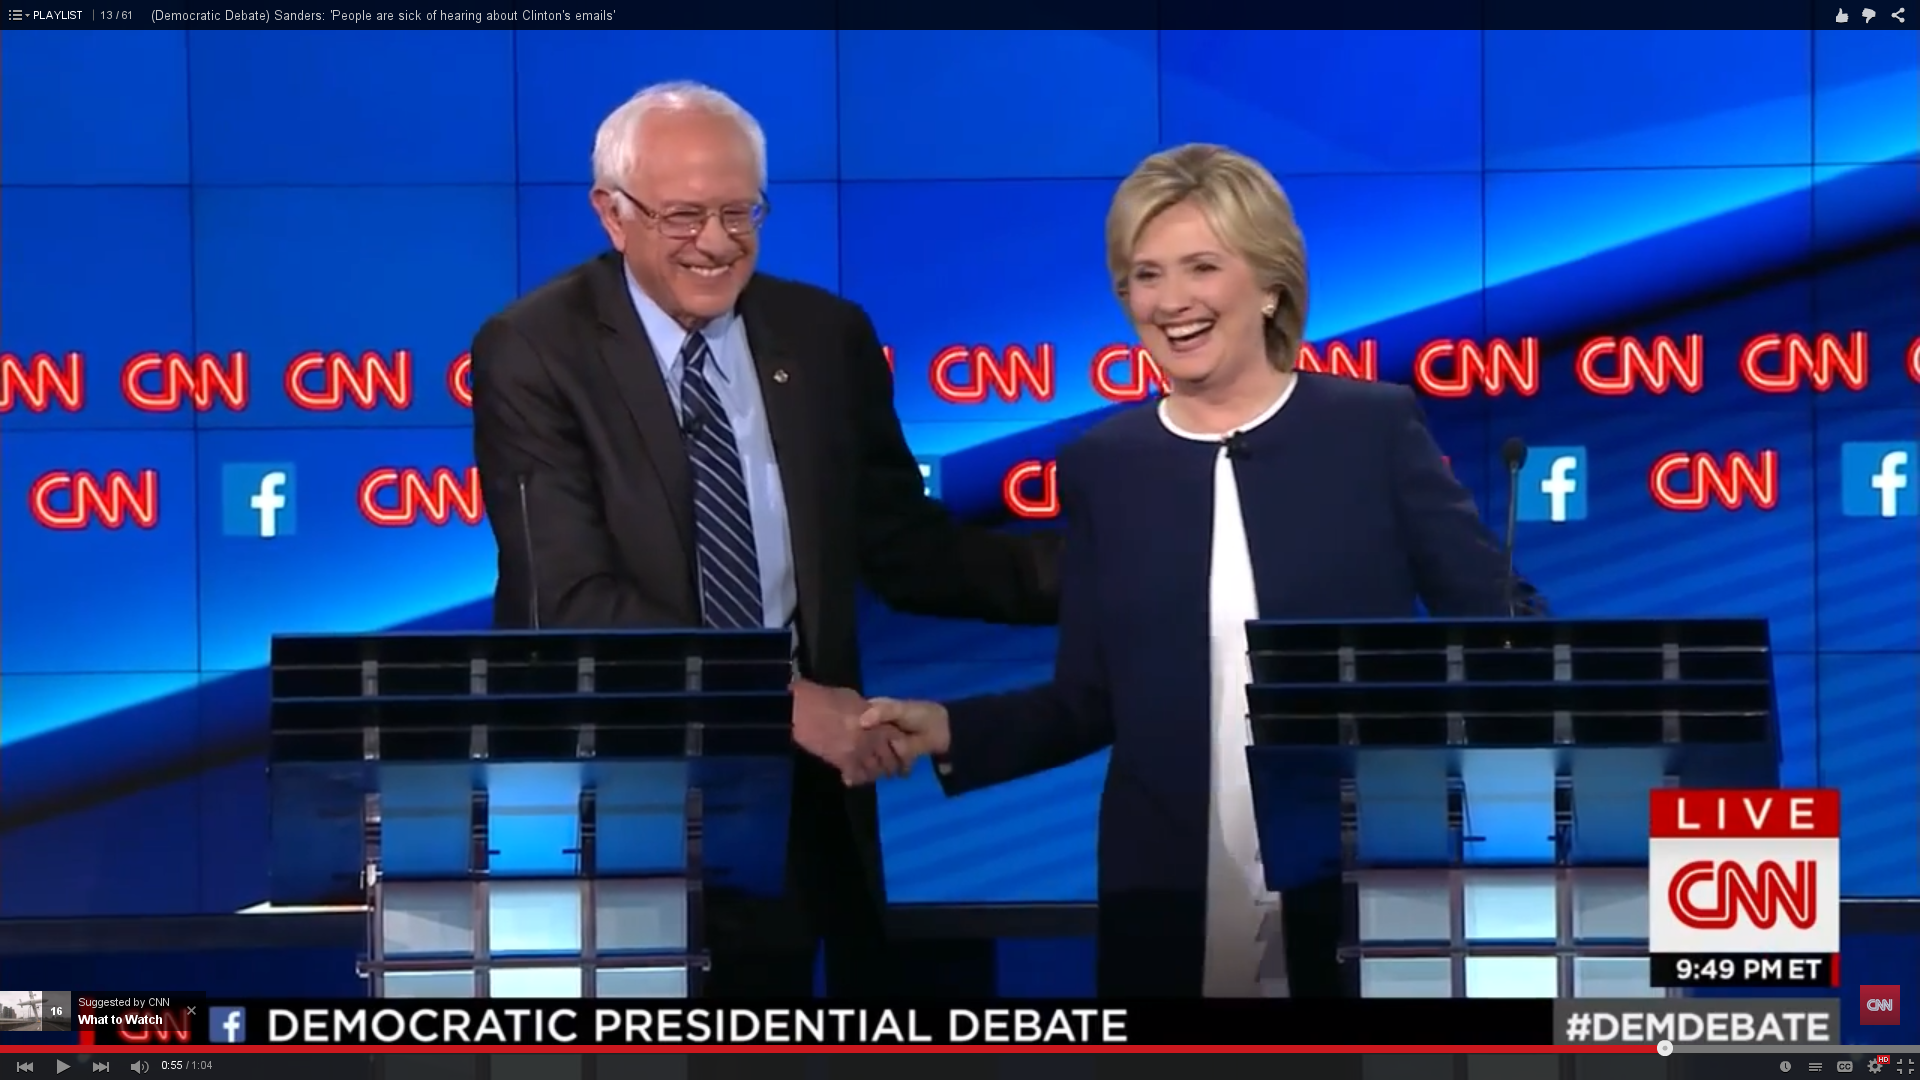 Sanders and Clinton smile and shake hands